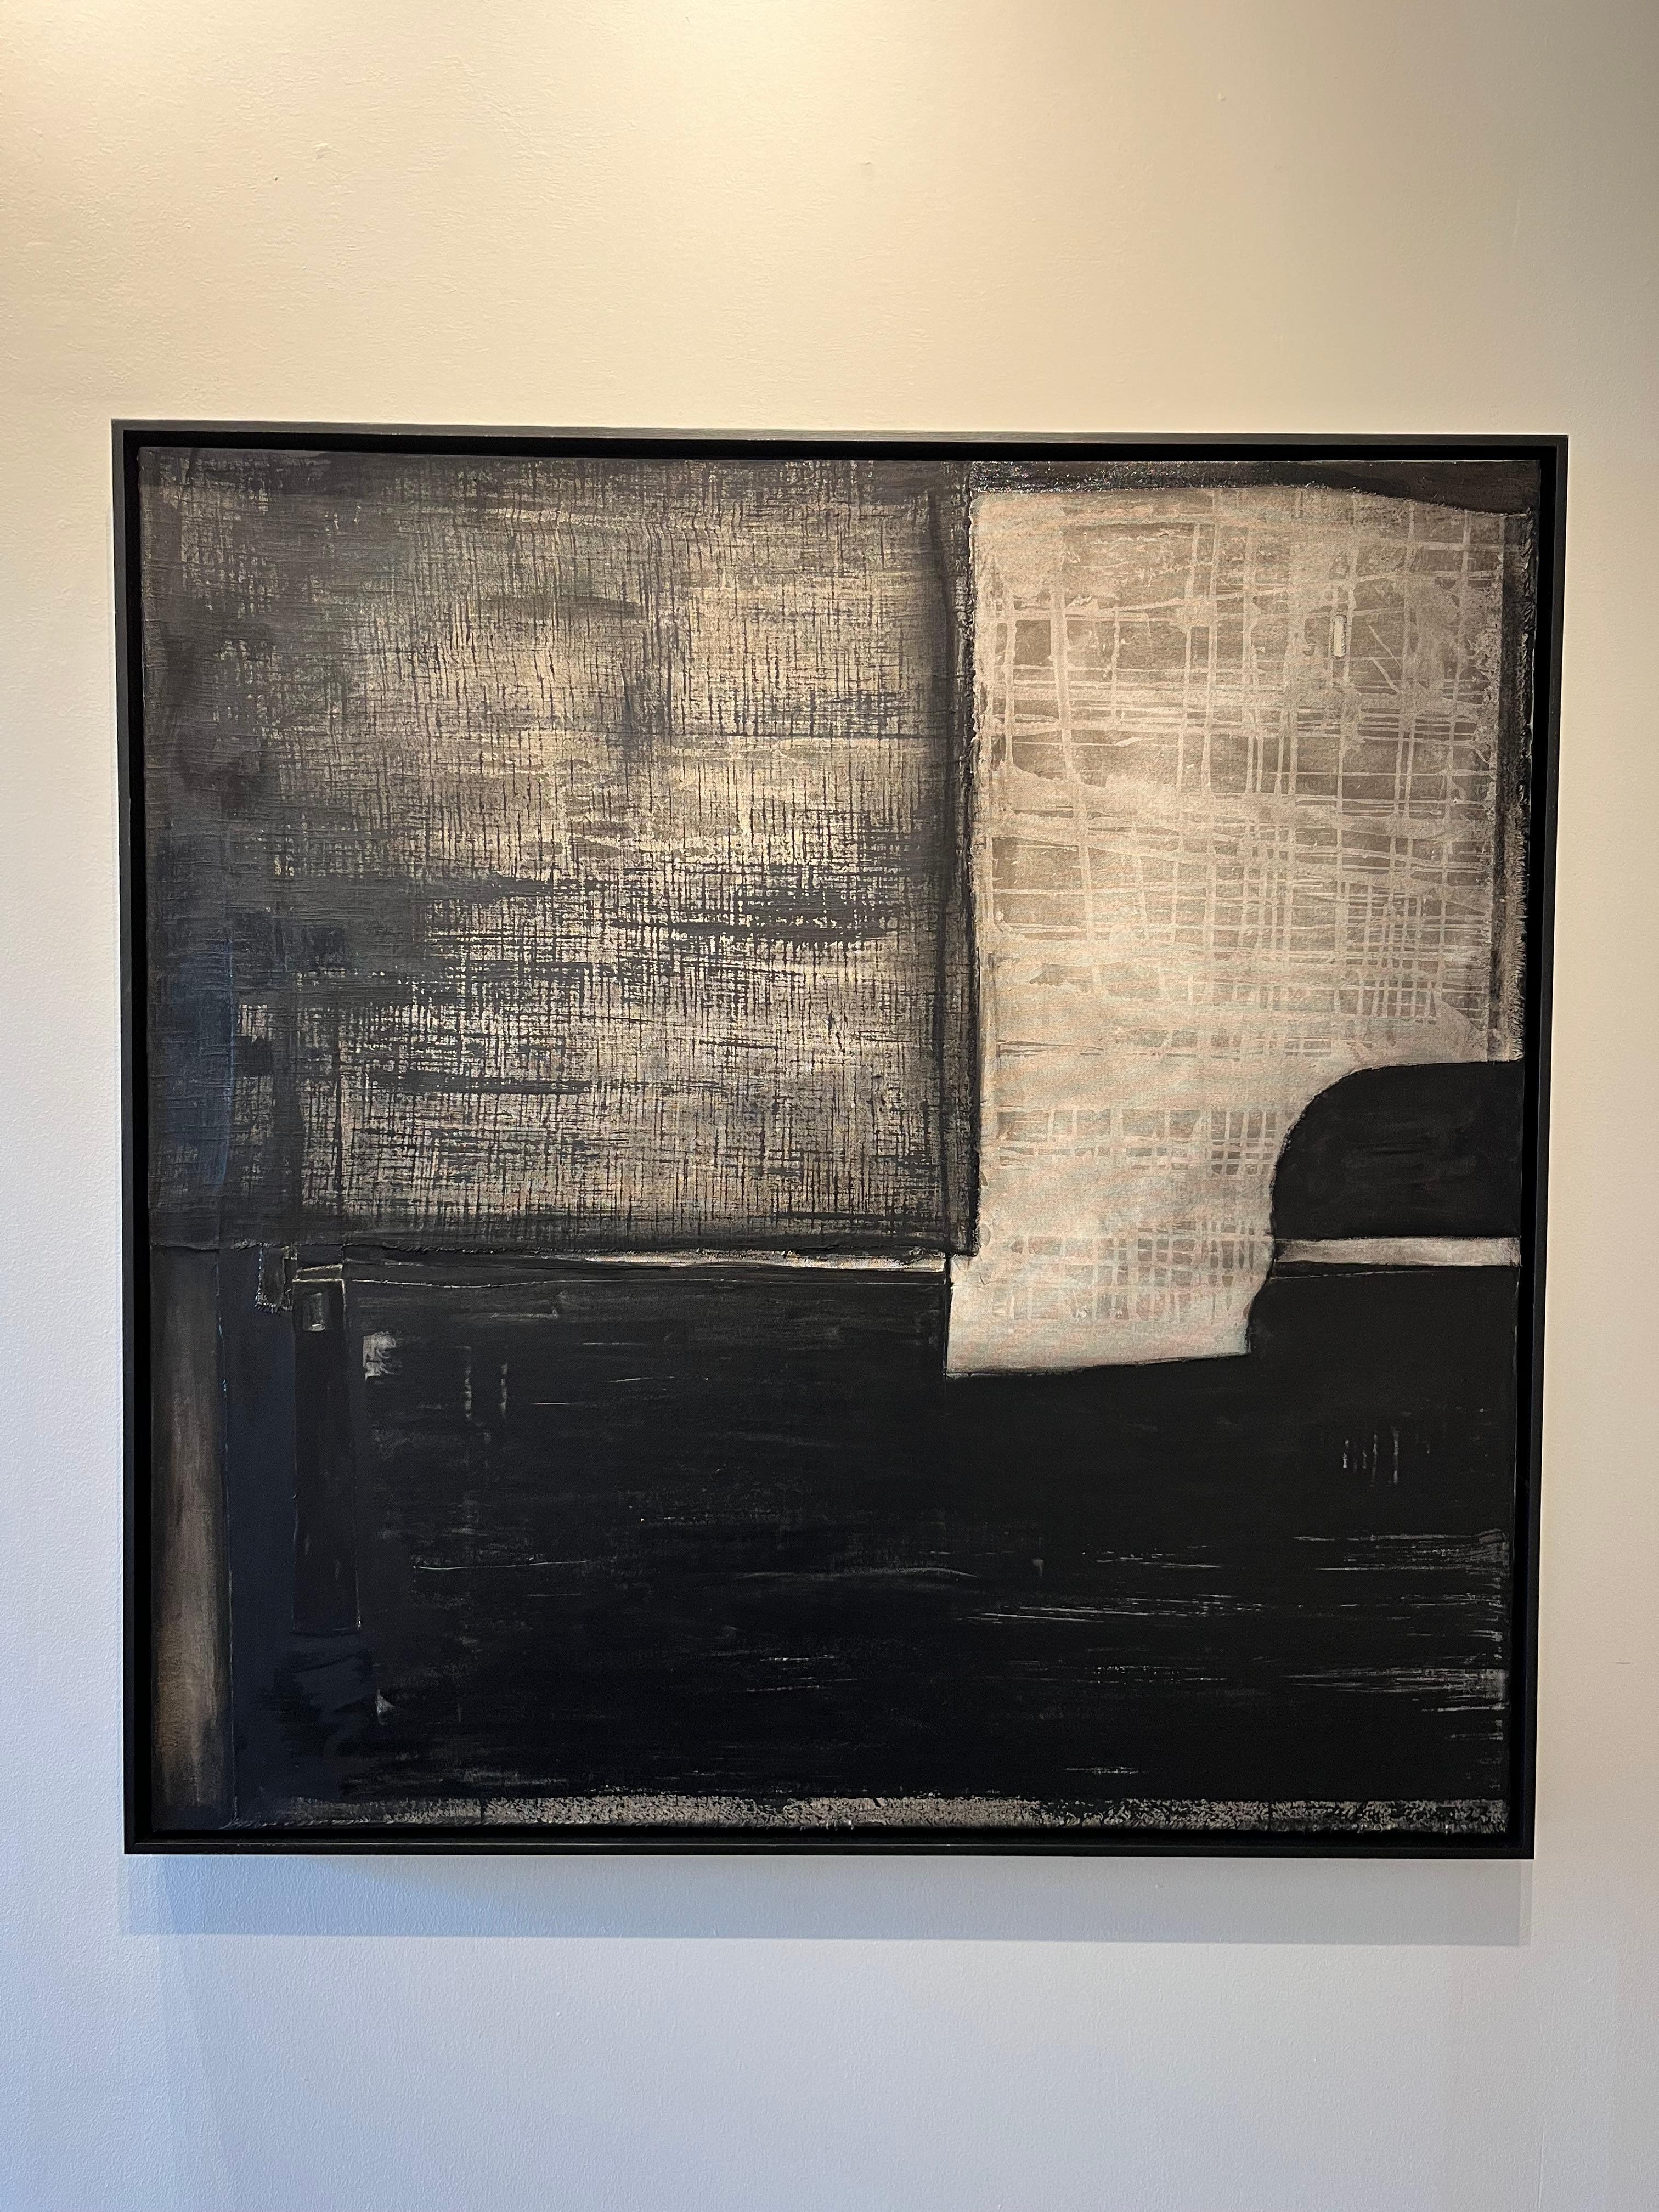  Nera 2 is a modern mixed media painting . 
I layered canvas and linen onto canvas with layers of black tones and finishes creating a textured painting in my favorite color. 